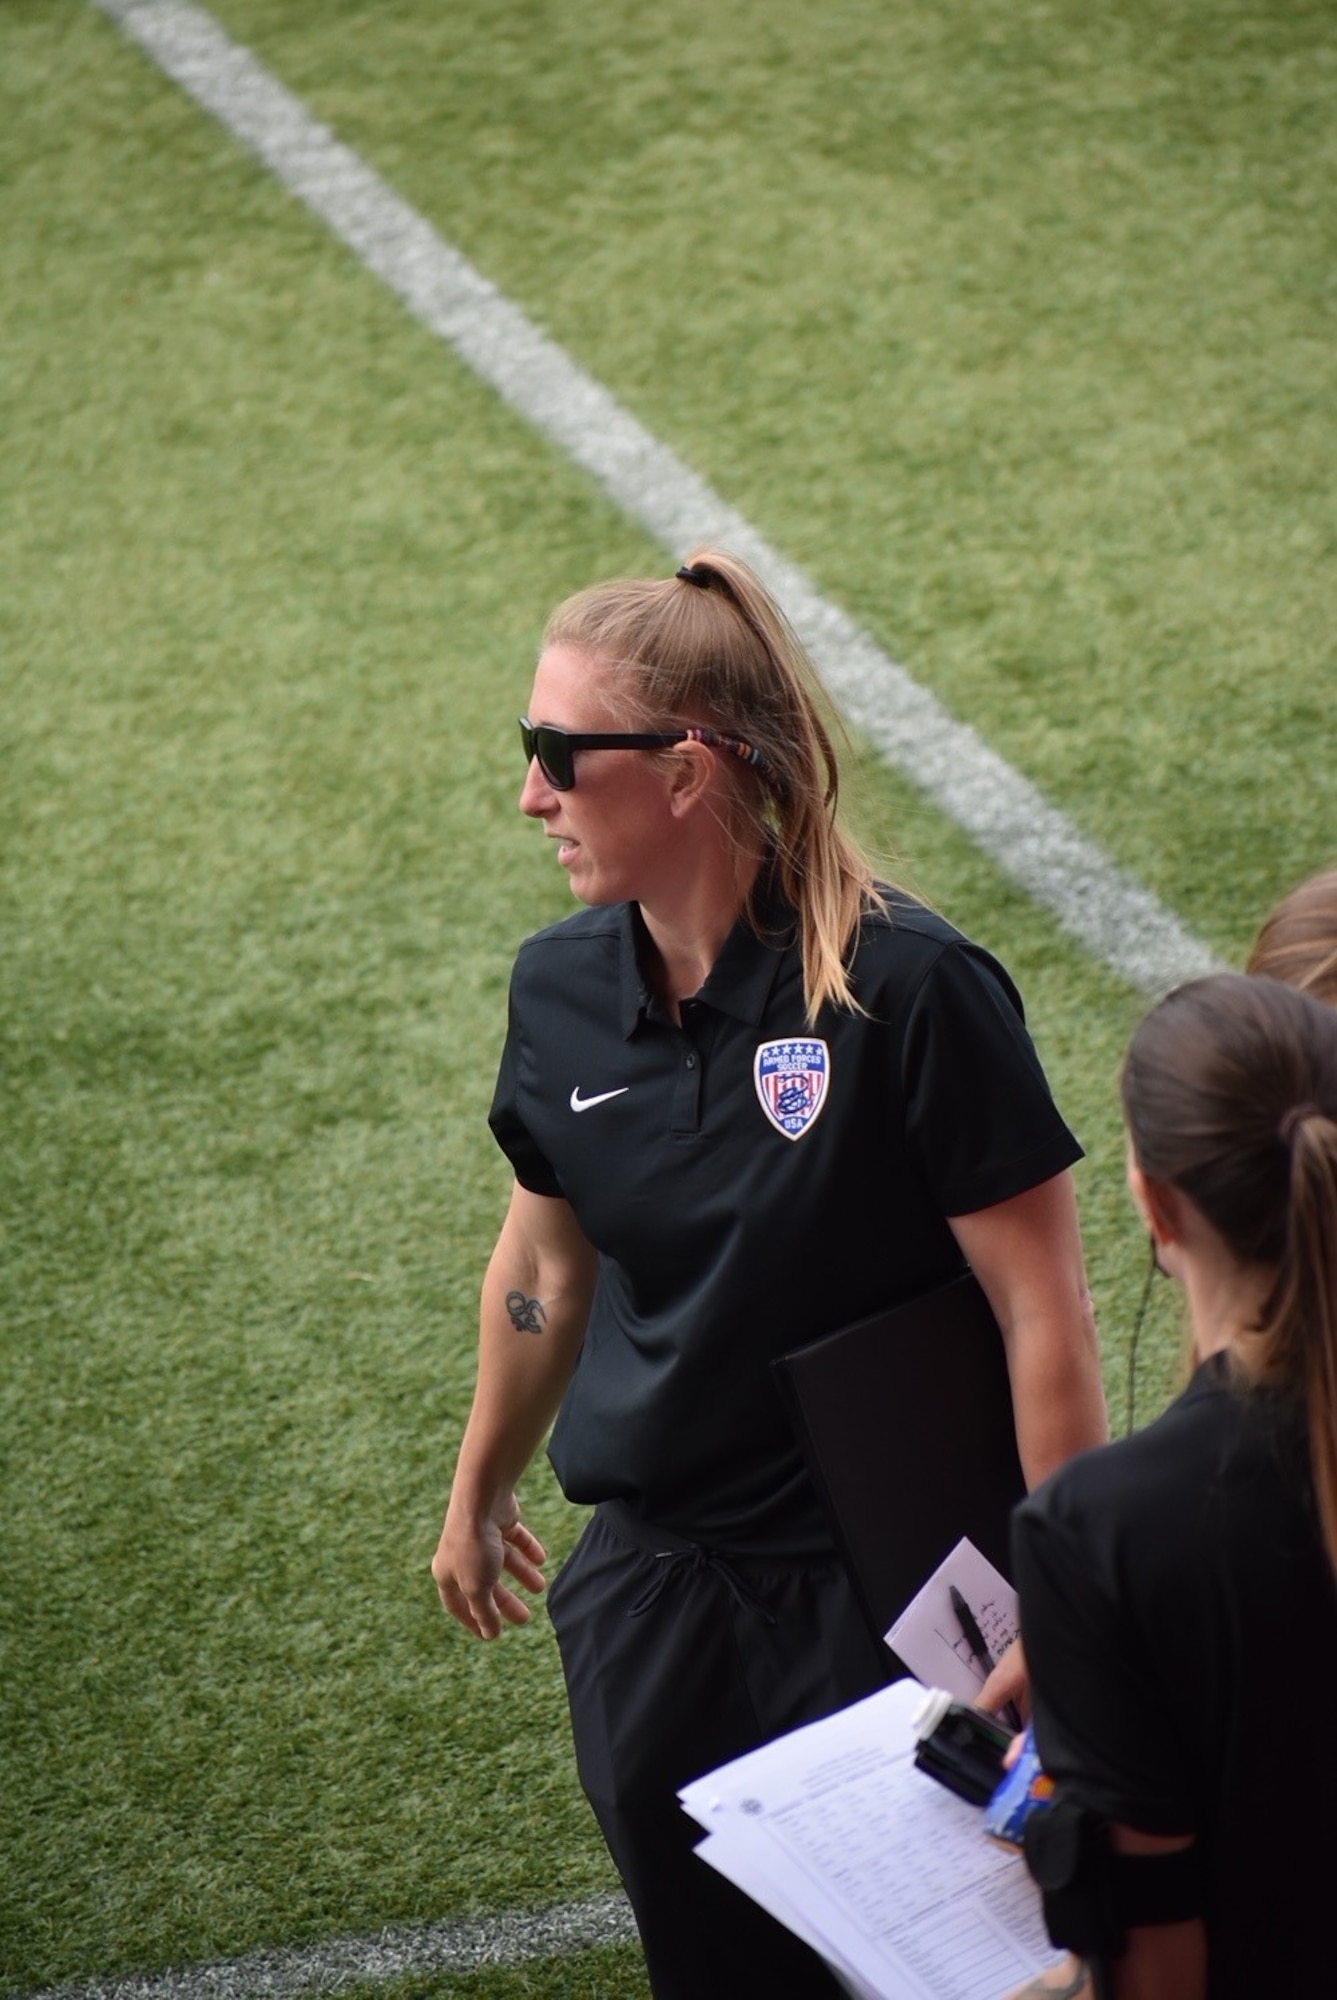 Maj. Erin Issler, an intelligence analyst for the Air Force Life Cycle Management Center, is the head coach of the Armed Forces women's soccer team. In her first International Military Sports Council tournament in 2023, she led the team to a 4-1 record and fifth place overall.